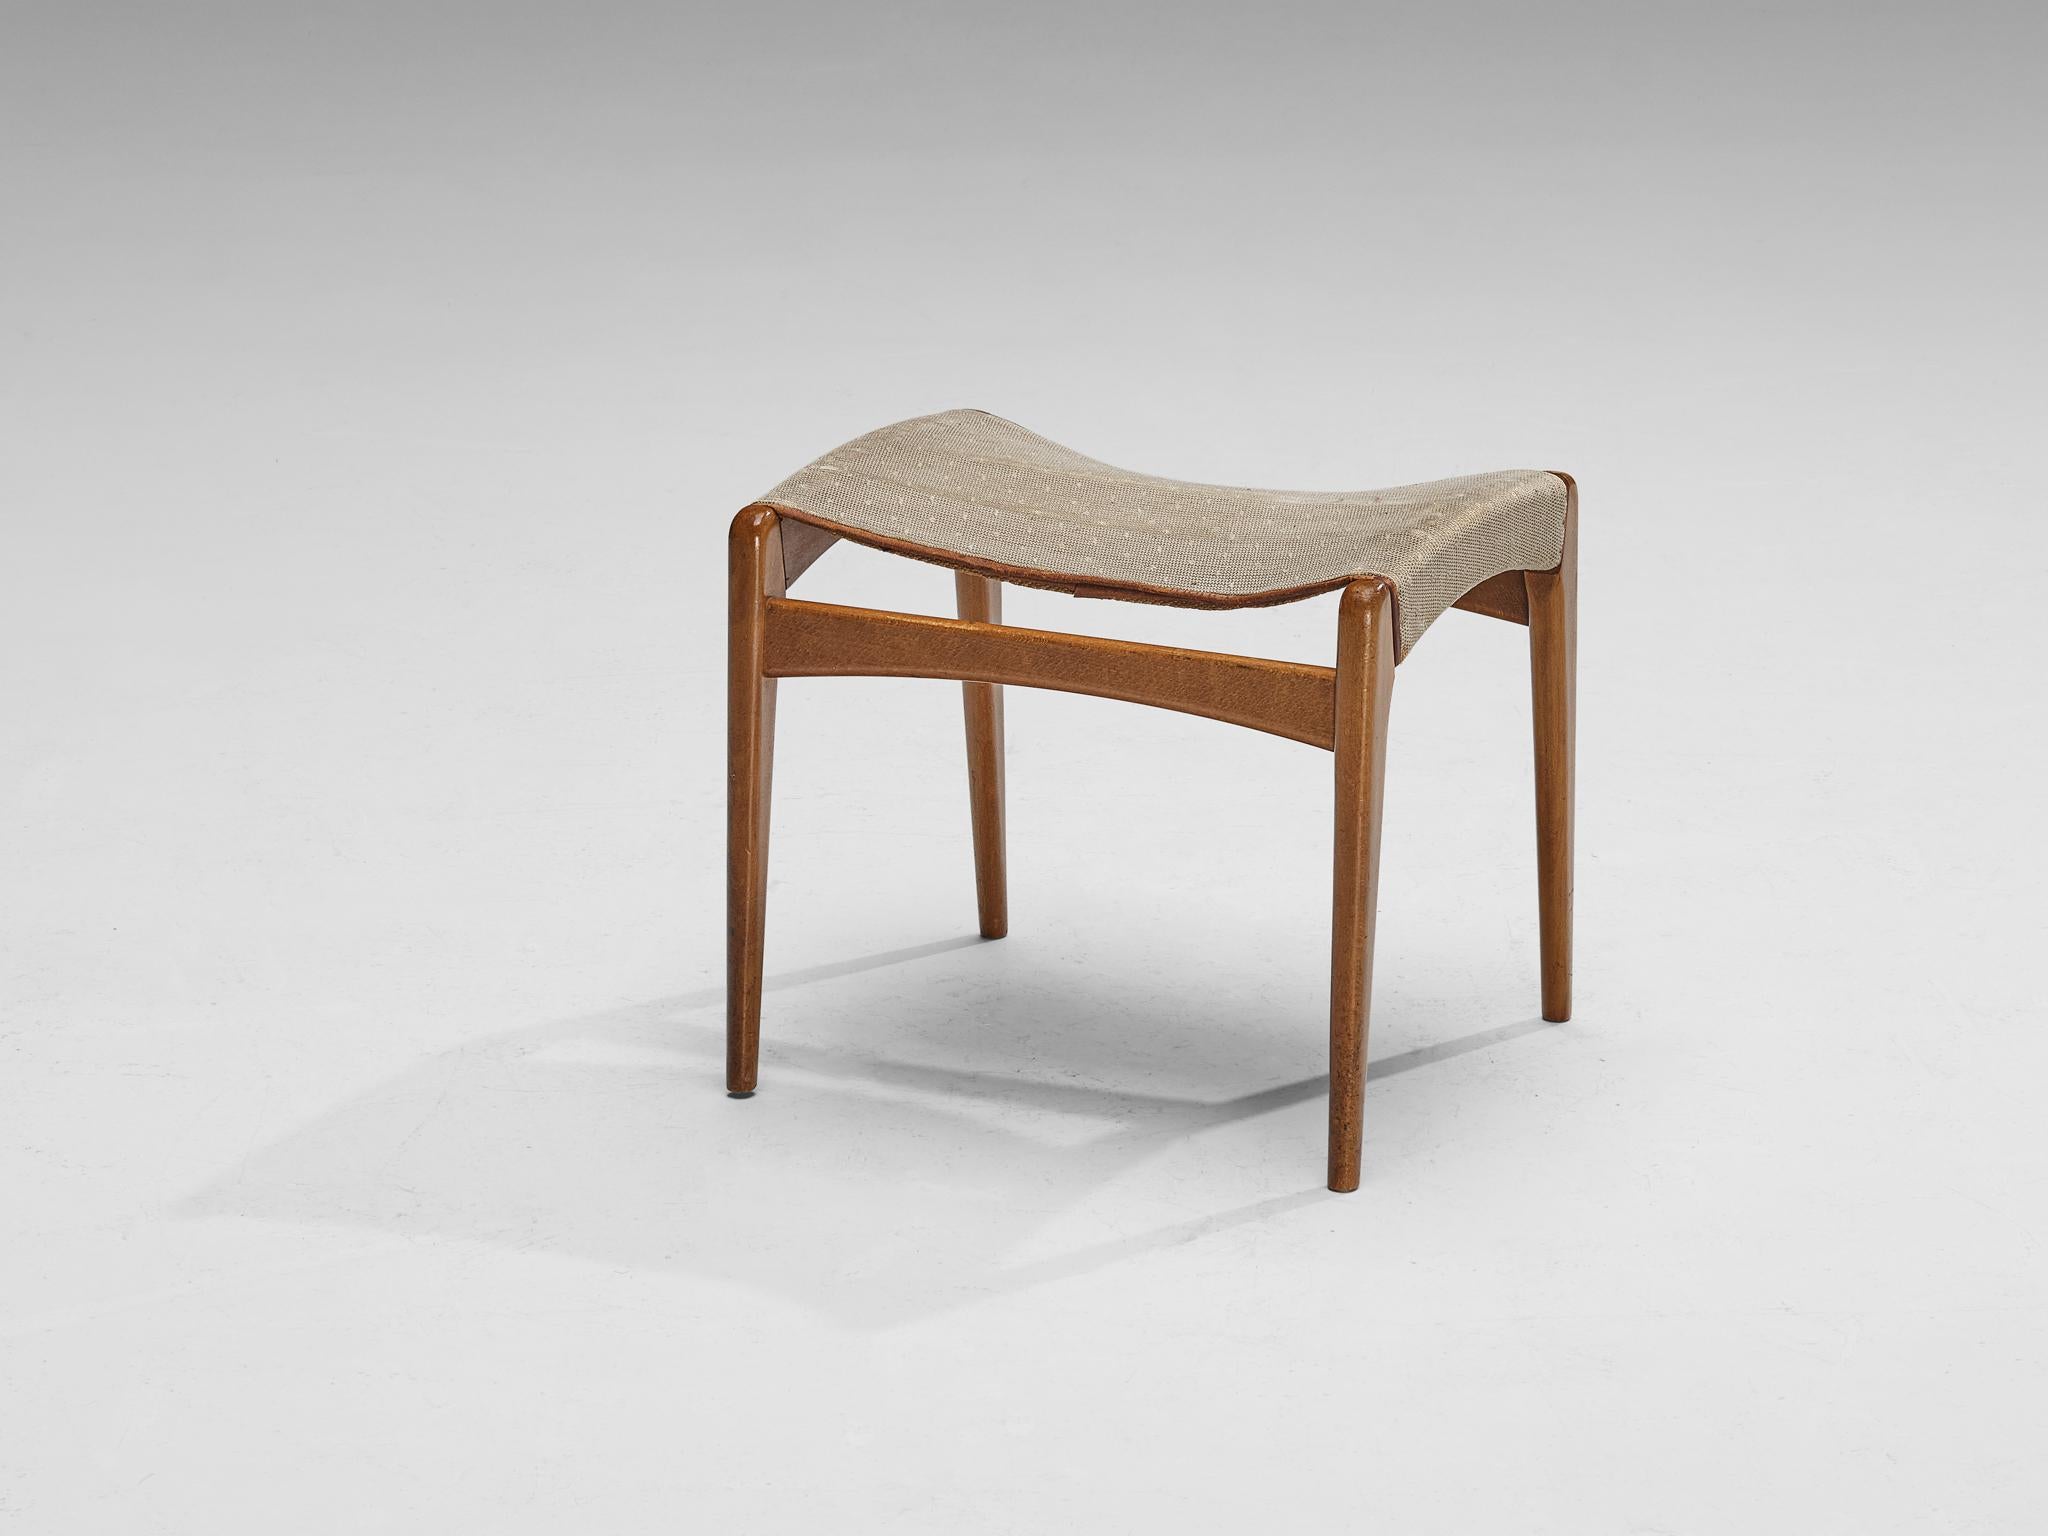 Fritz Hansen, stool or ottoman, model '1164', wool, beech, leather, Denmark, 1960s

Elegant in line and practical to use, this stool by Fritz Hansen is exemplary for Mid-Century Scandinavian Design. The wooden framework is comprised of four slender